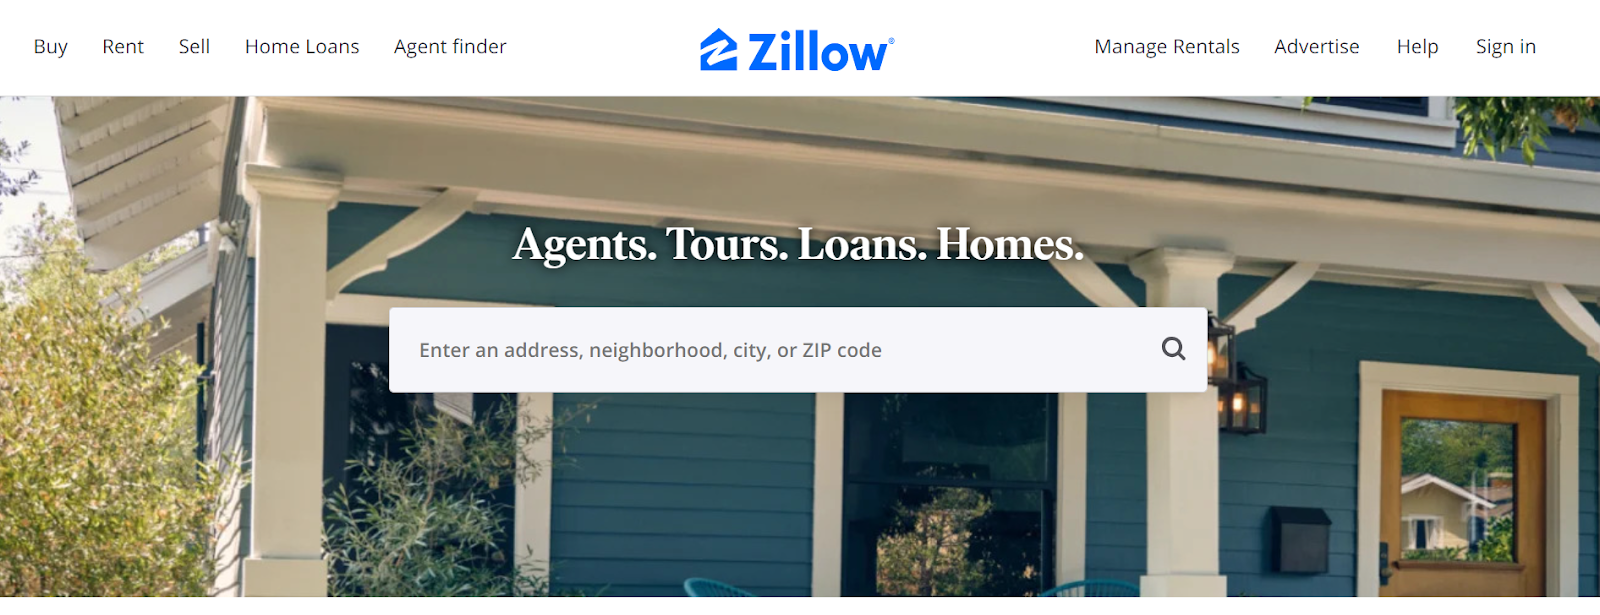 Homepage of Zillow with searchbar option to find agents, homes etc.